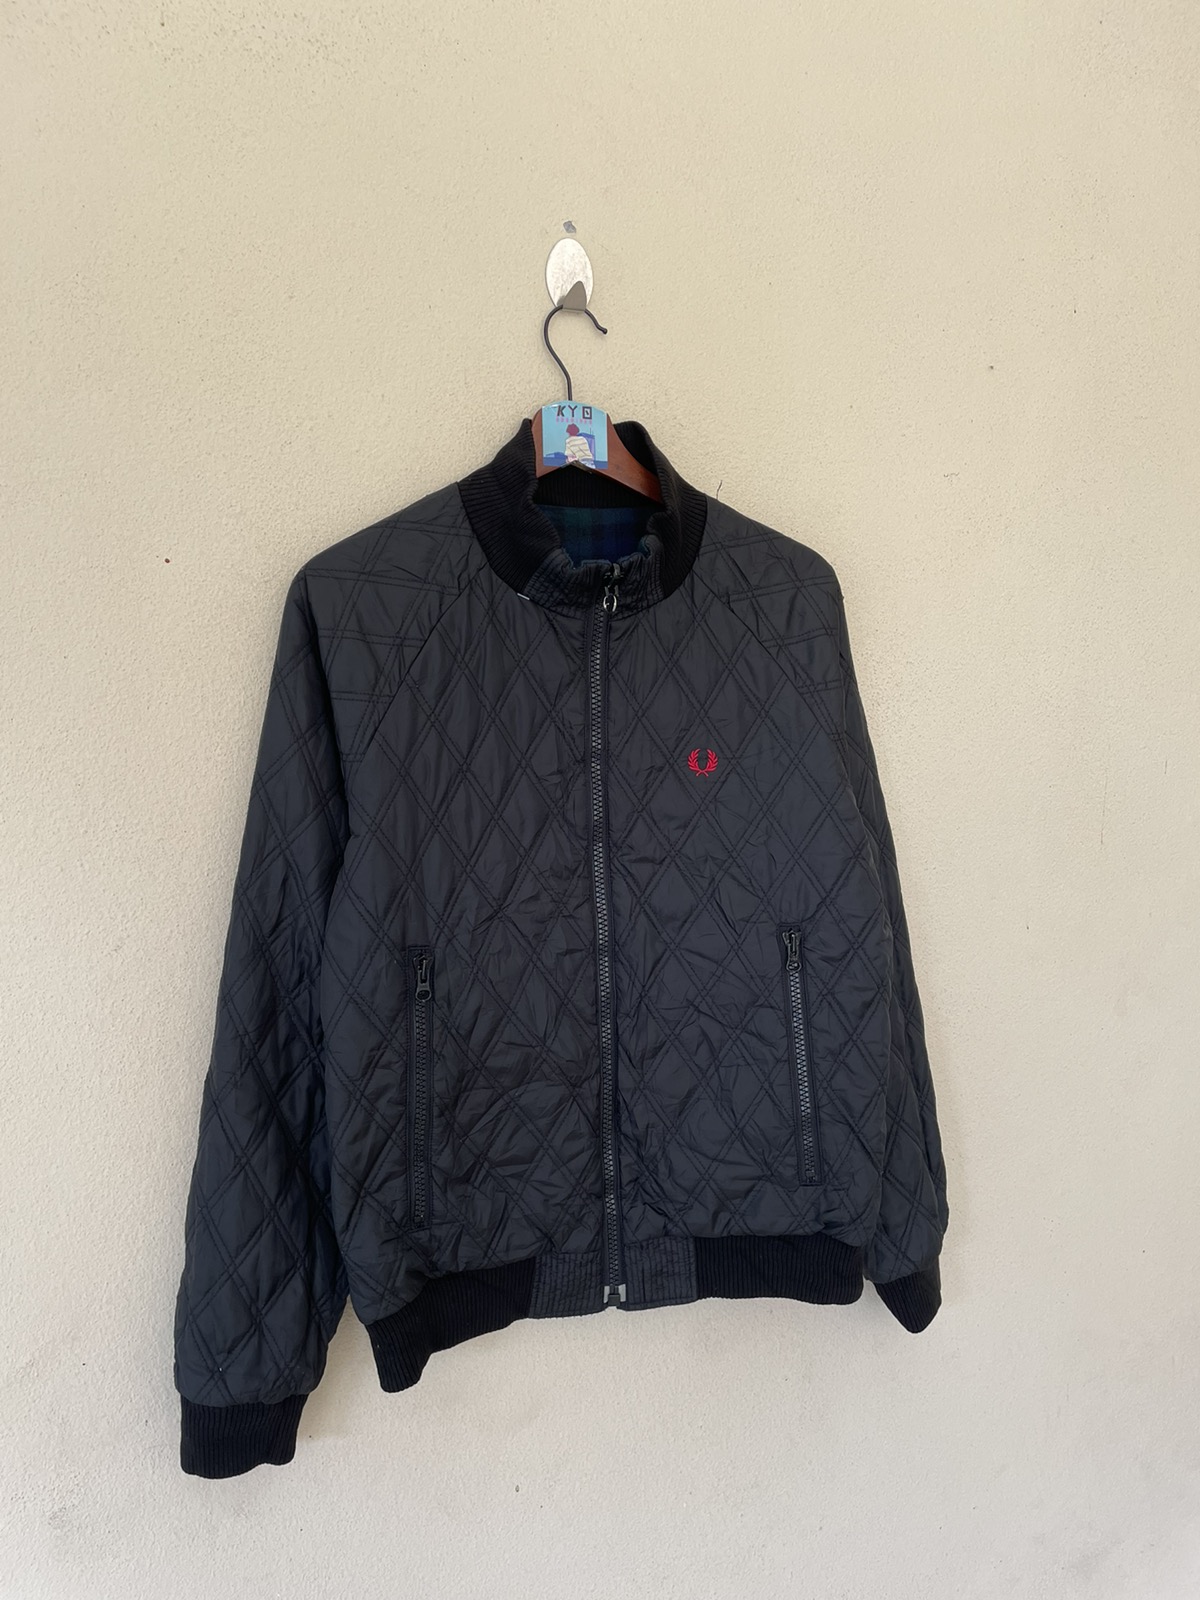 FRED PERRY REVERSIBLE JACKET - 8